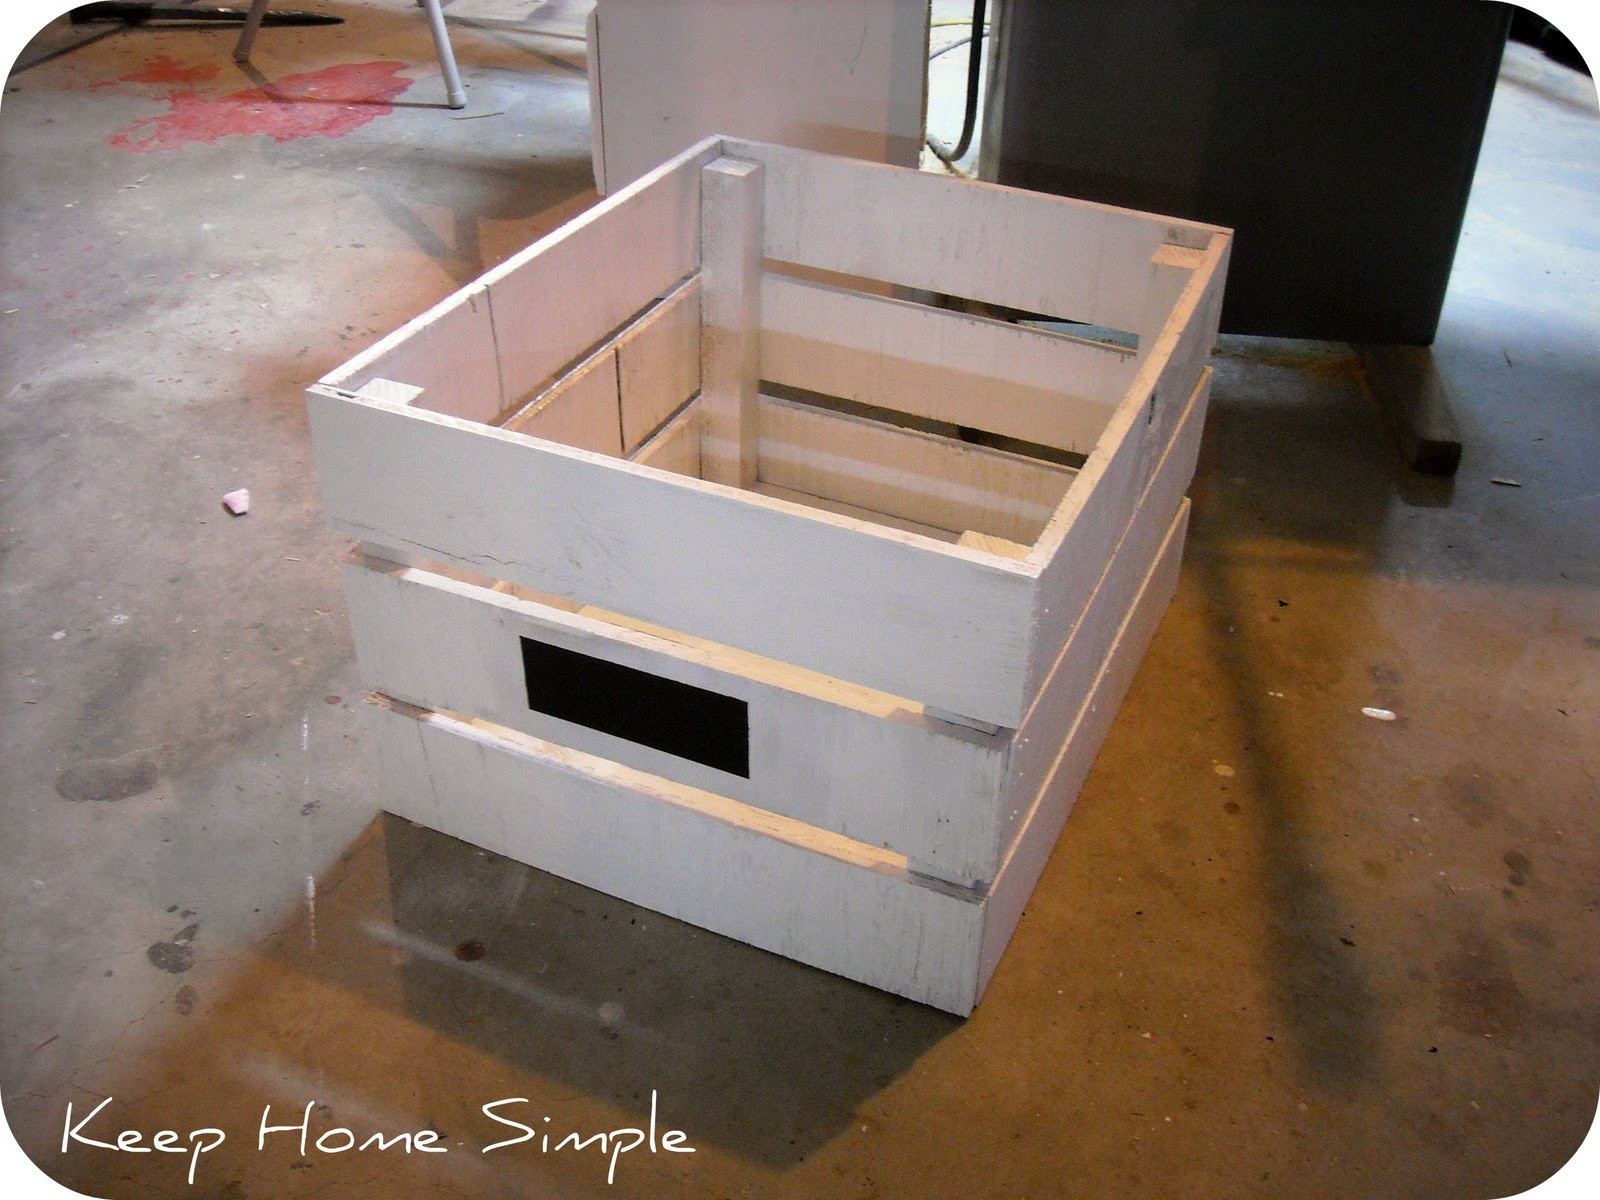 DIY Wood Crate
 Keep Home Simple Homemade Wooden Crates